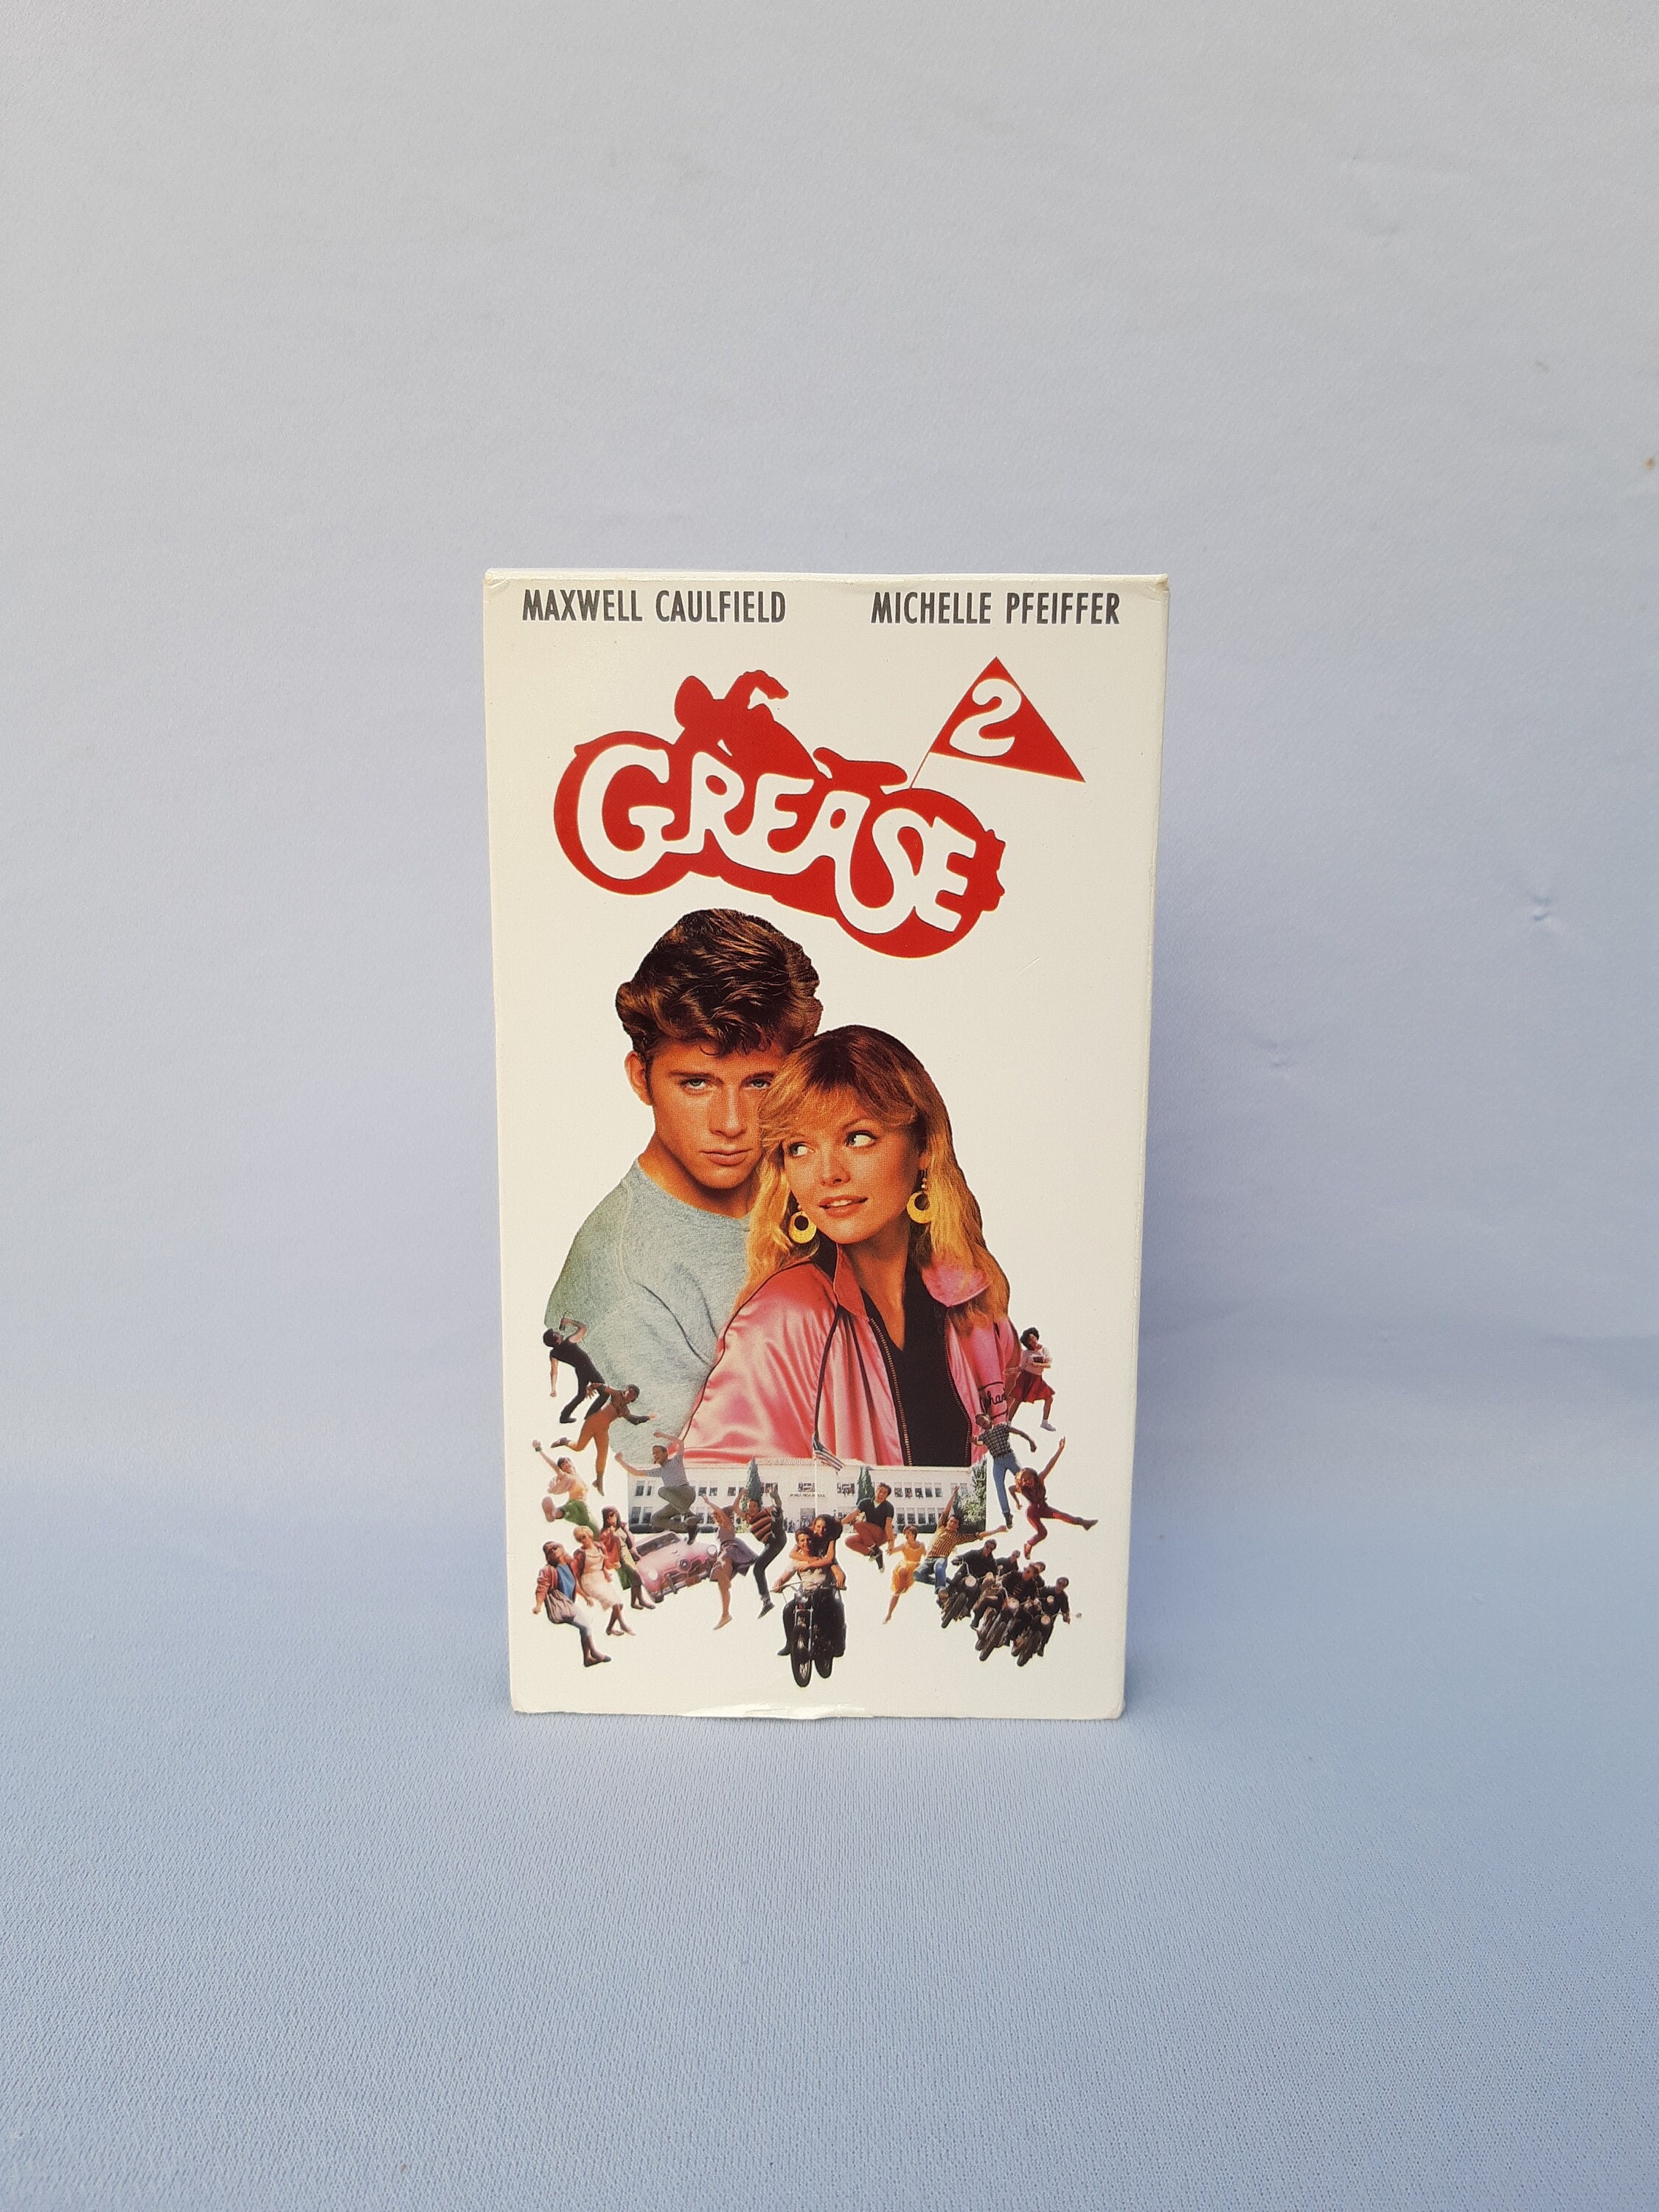 Grease 2 1982 VHS. Michelle Pfeiffer. Paramount Home Video - Etsy UK